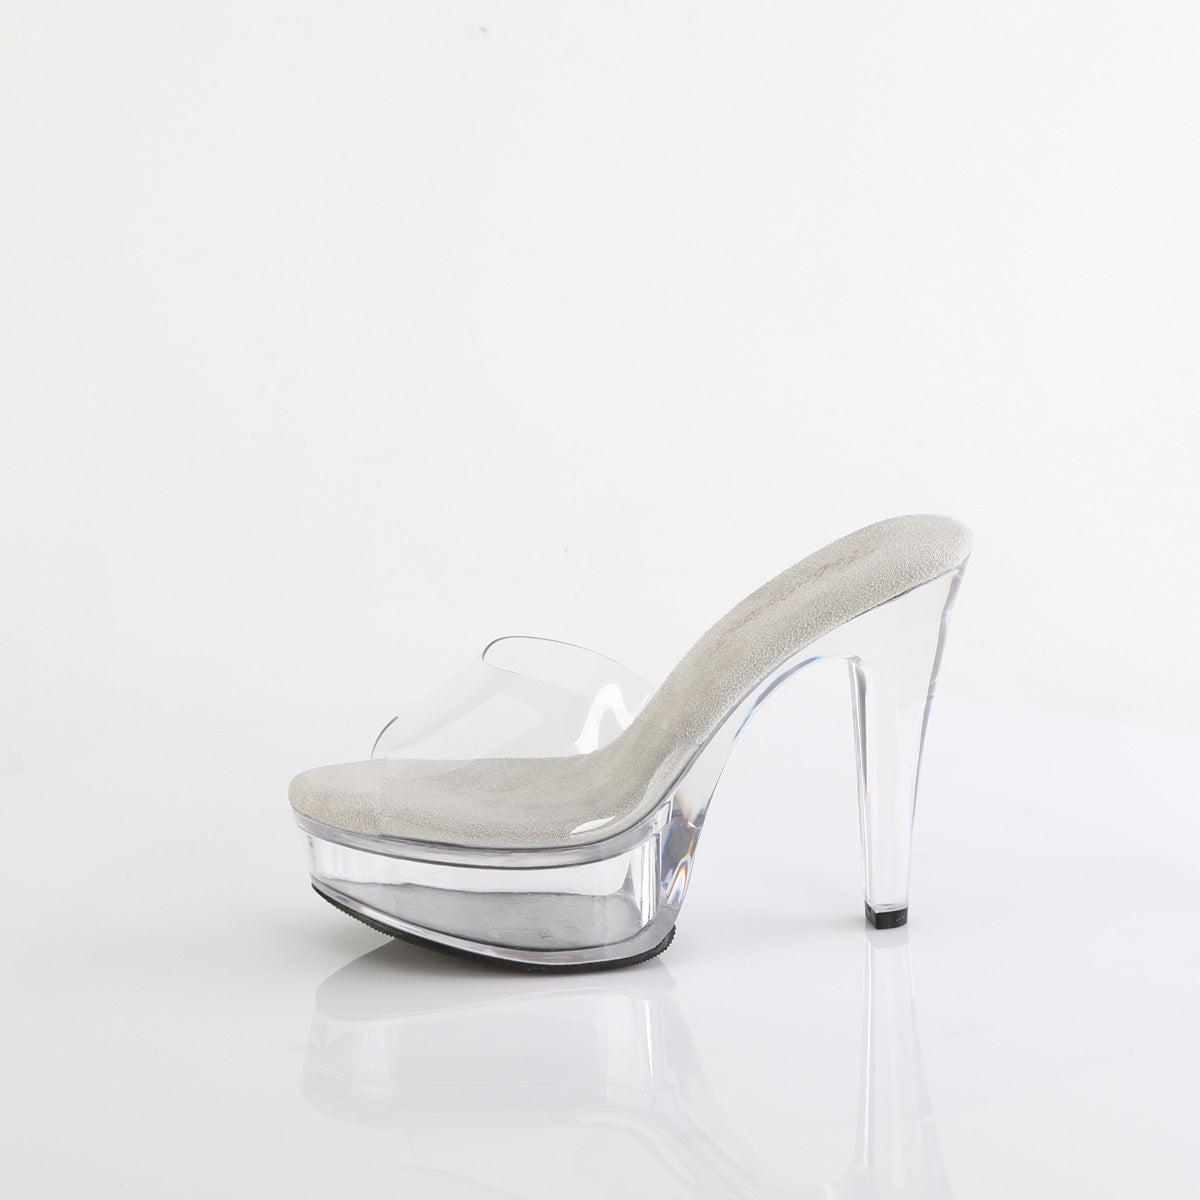 MARTINI-501 Fabulicious Clear Chunky Pole Dancing Shoes.